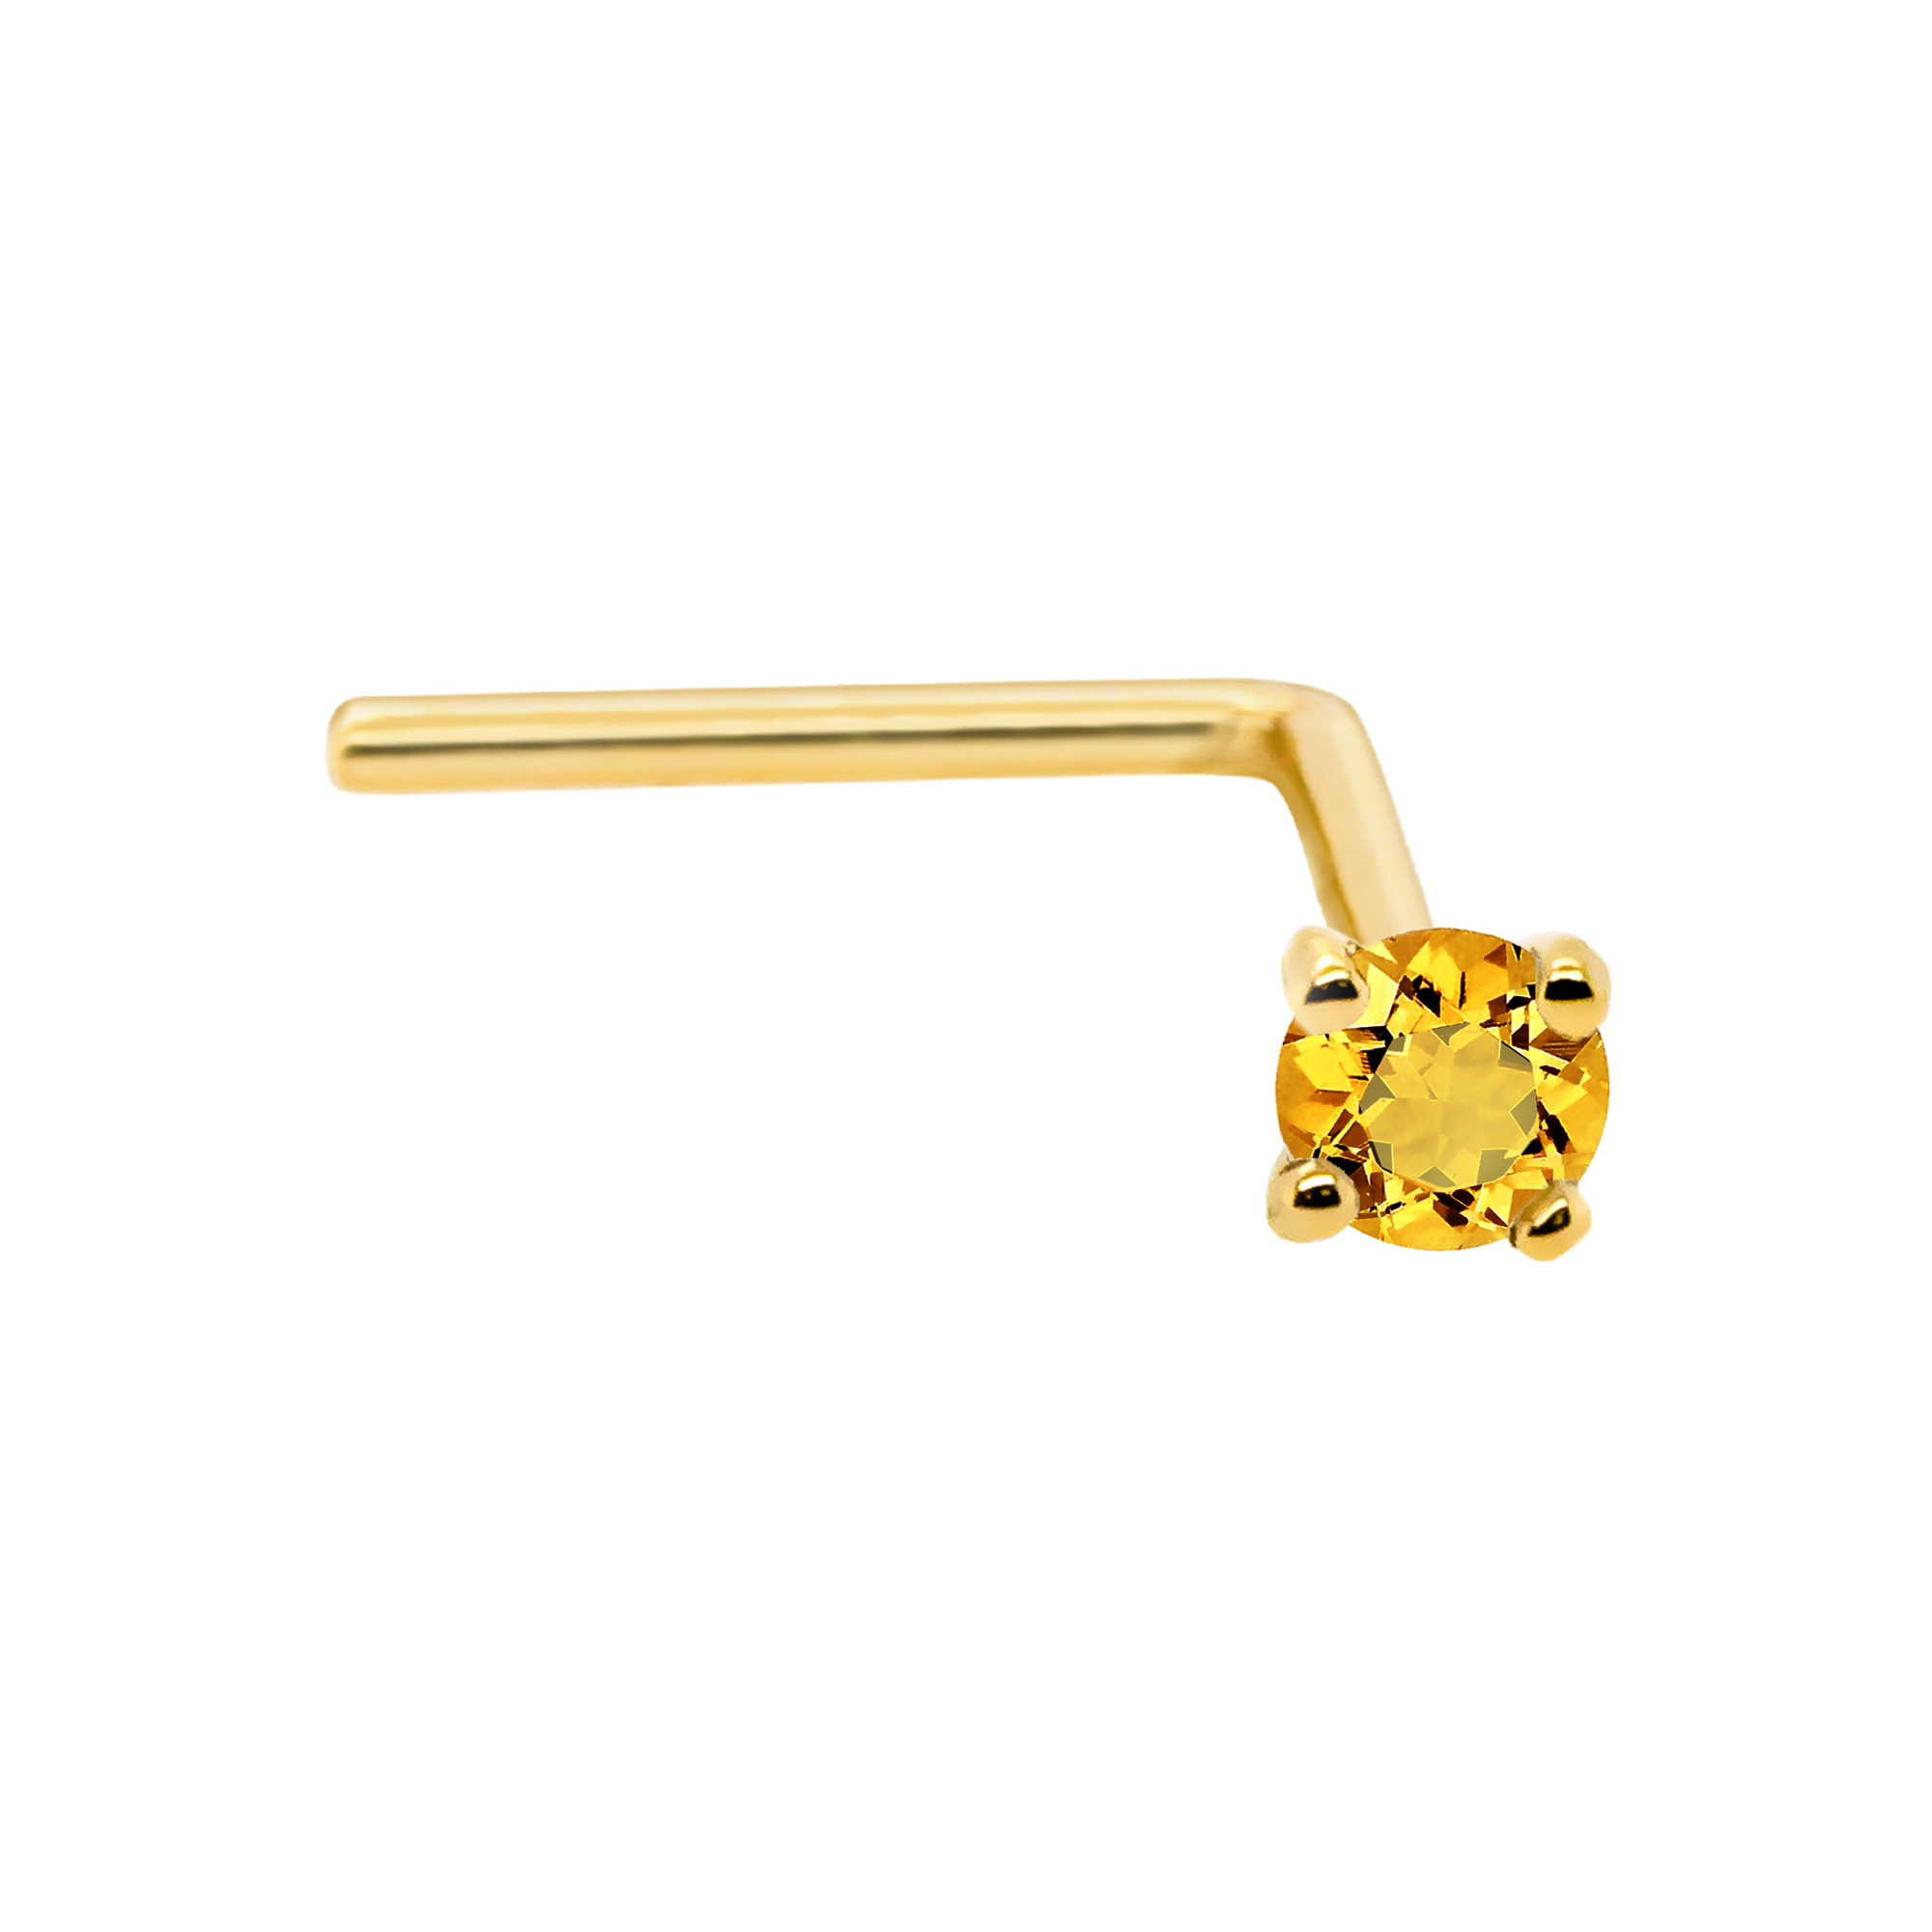 22G Solid 14Kt Gold L-Shape Nose Stud with real Citrine Gemstone, 14kt Yellow Gold or 14kt White Gold Prong Setting - November Birthstone Nose Ring